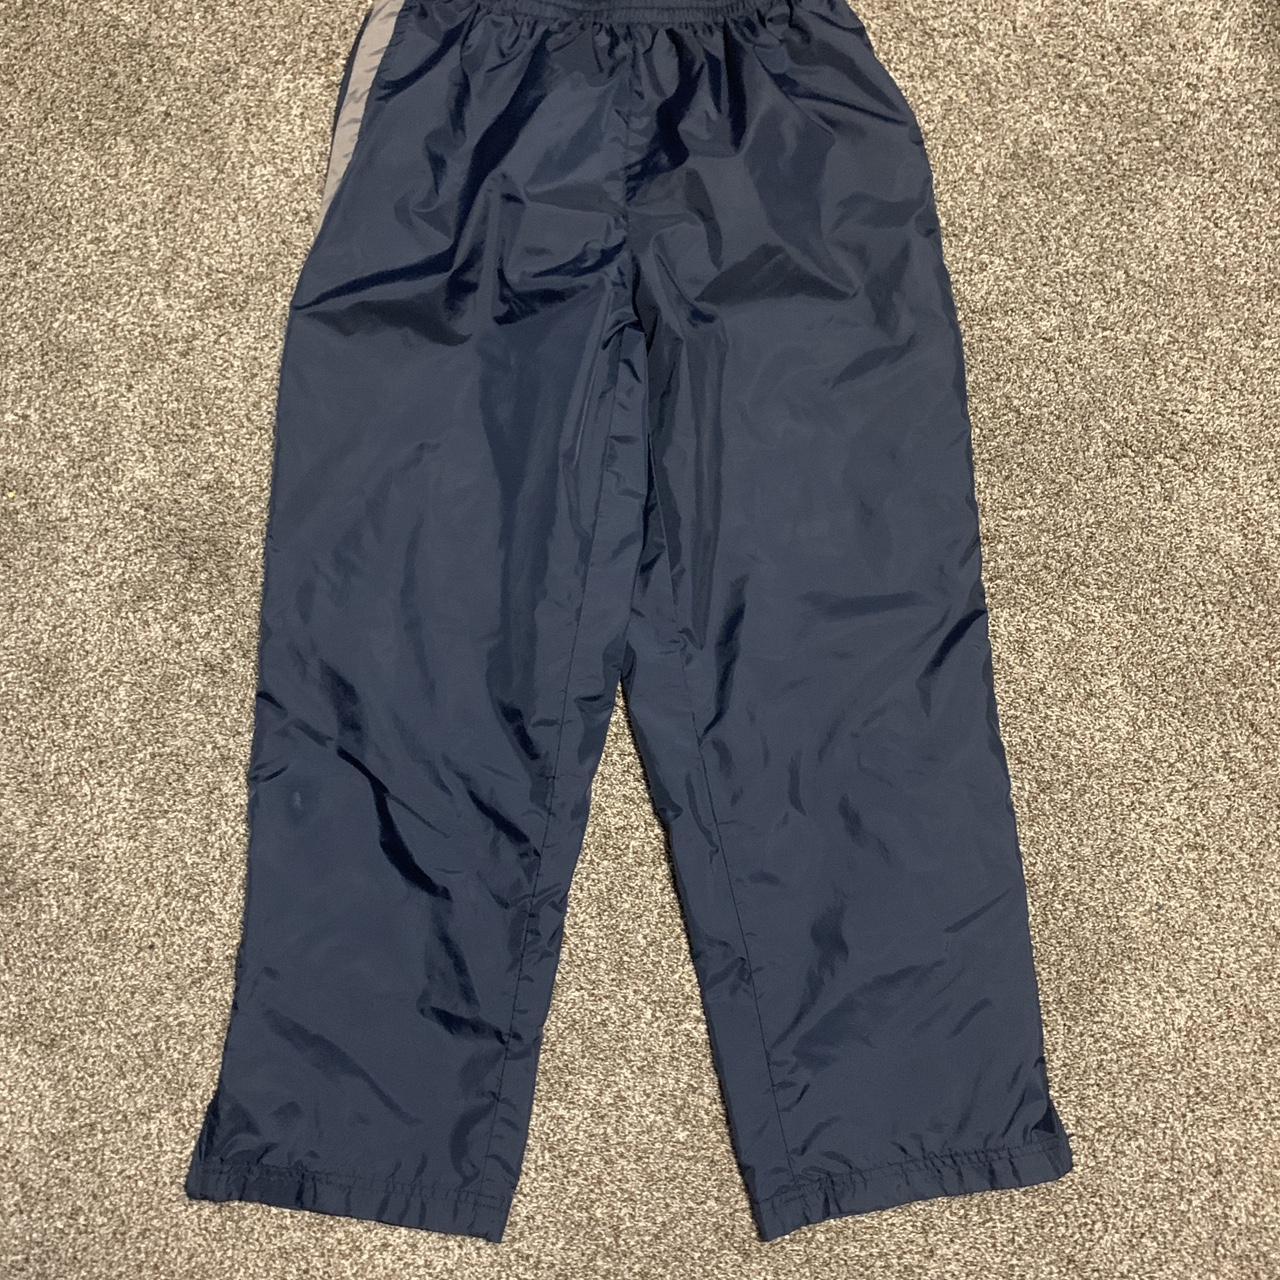 C&B navy and gray track pants with no flaws - Depop